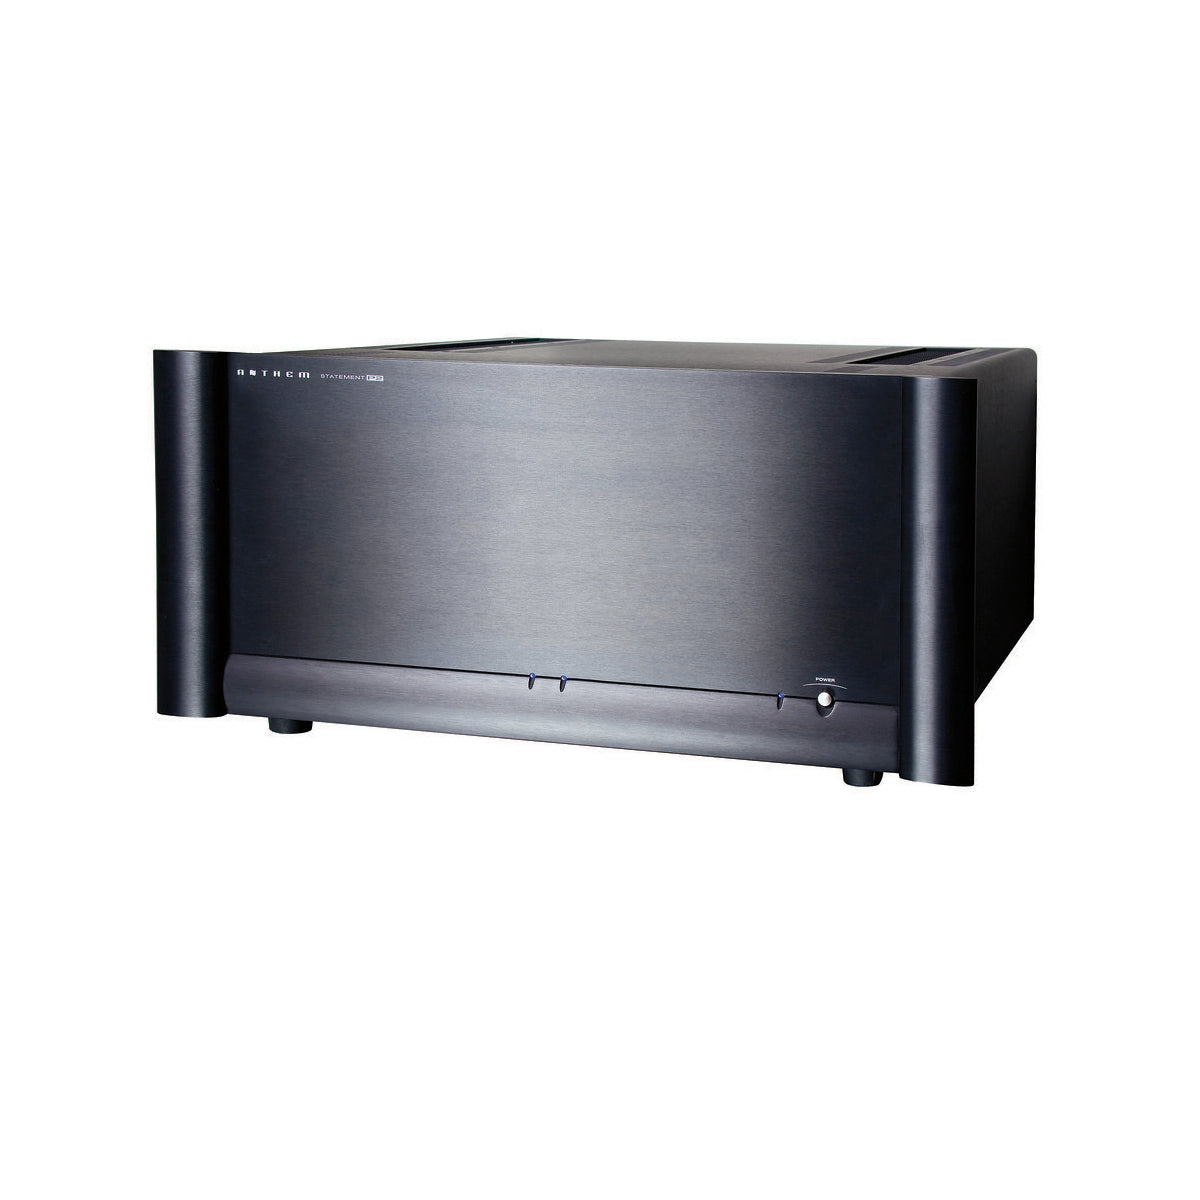 Anthem Statement P2 2-channel Power Amplifier - Black (back order) - The Audio Experts